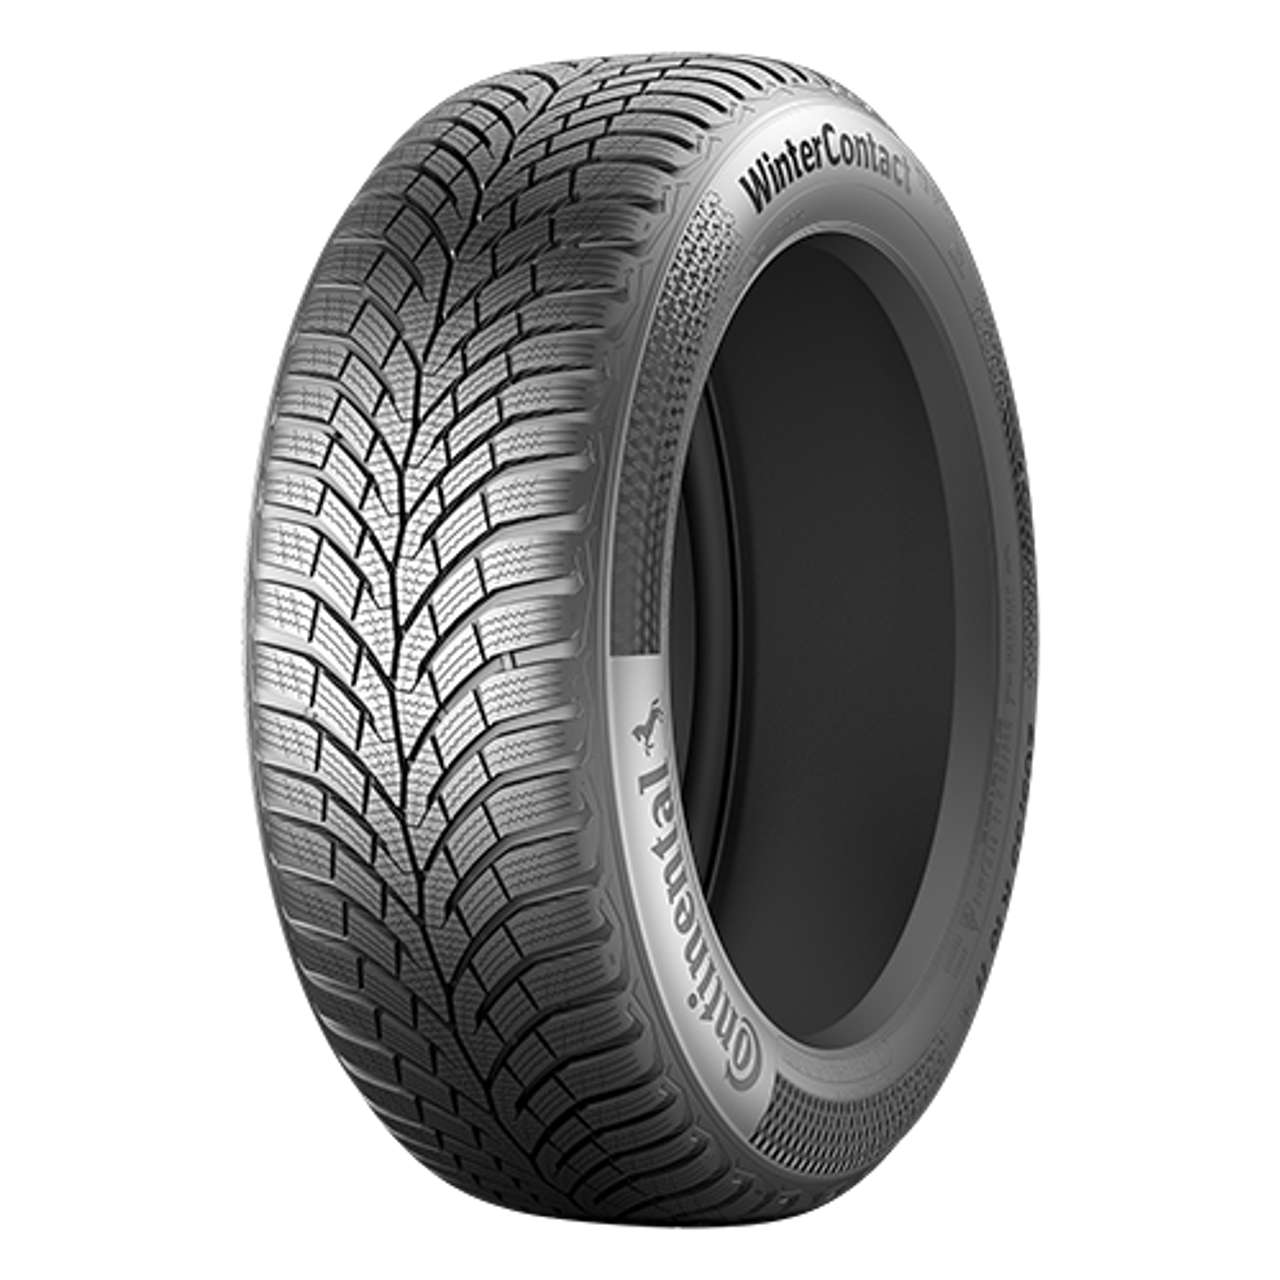 CONTINENTAL WINTERCONTACT TS 870 (EVc) 155/65R14 75T BSW